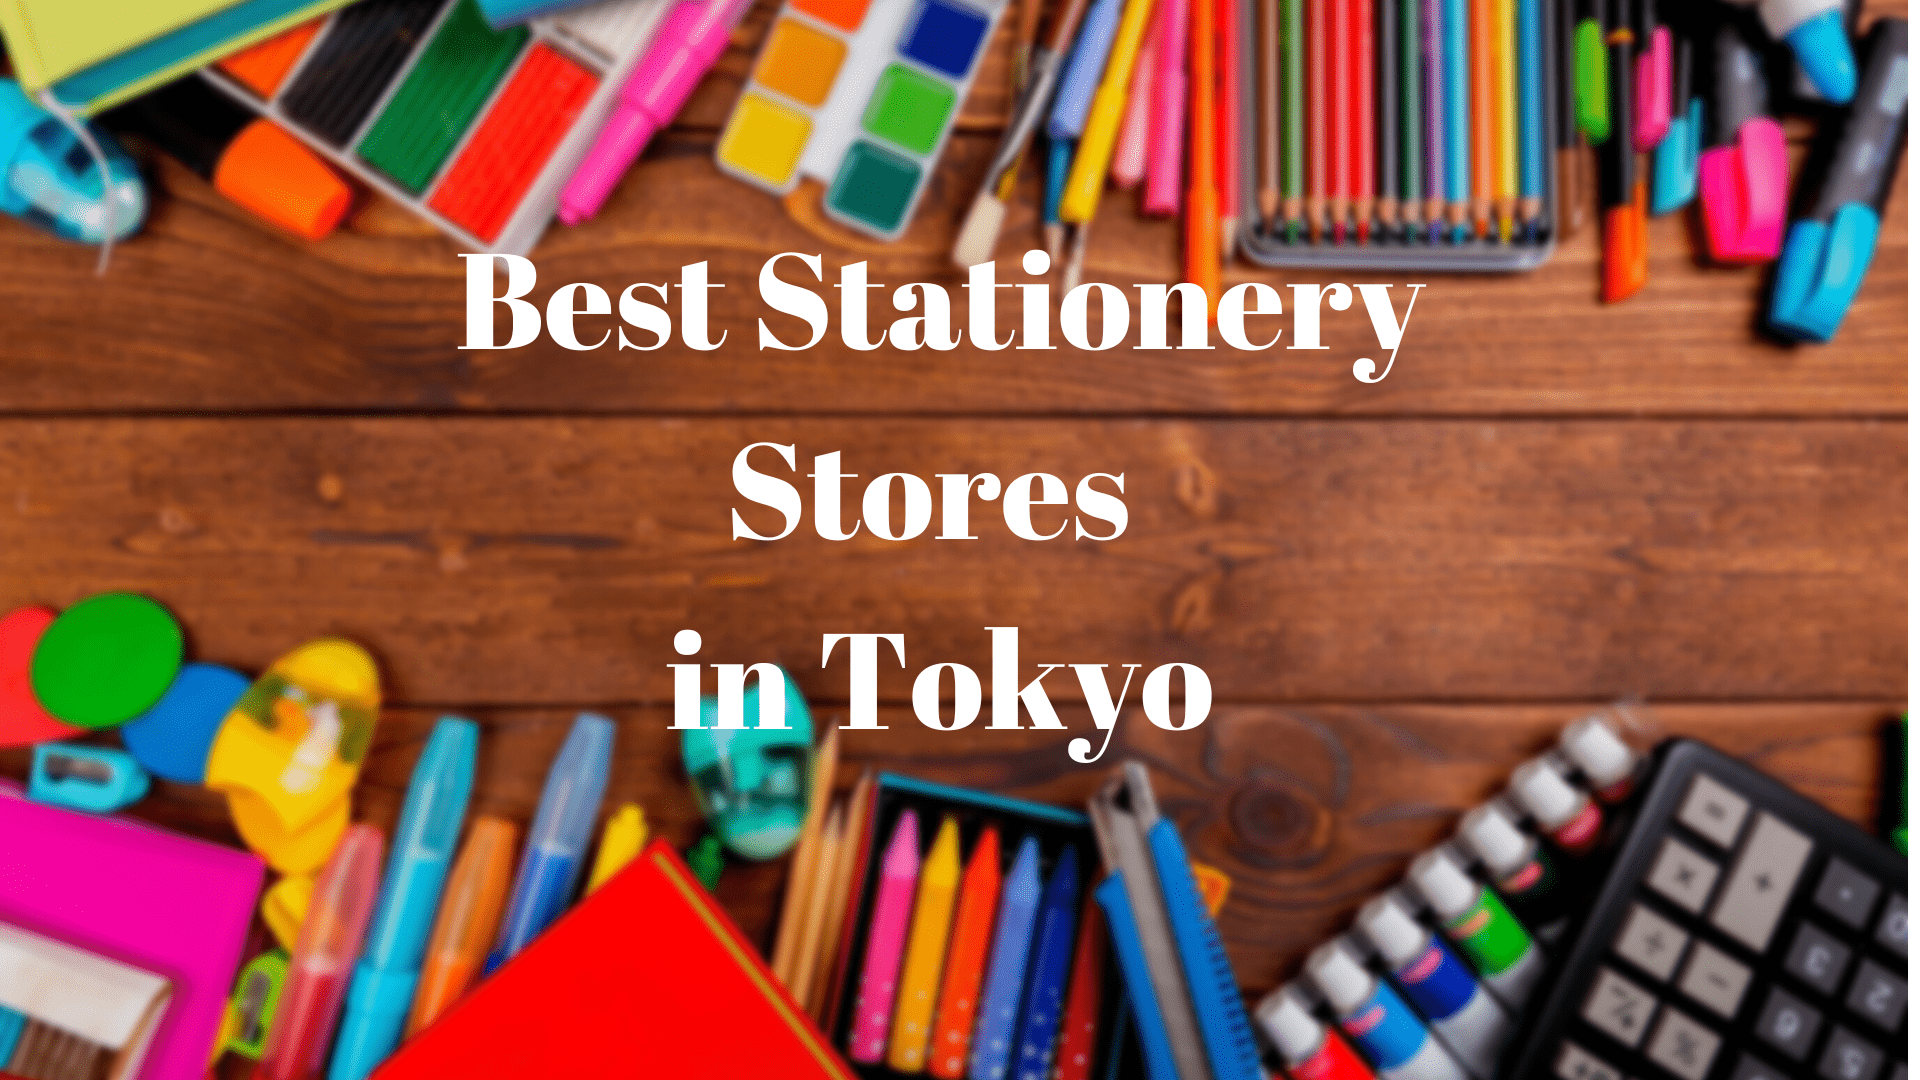 7 Best Stationery Stores in Tokyo